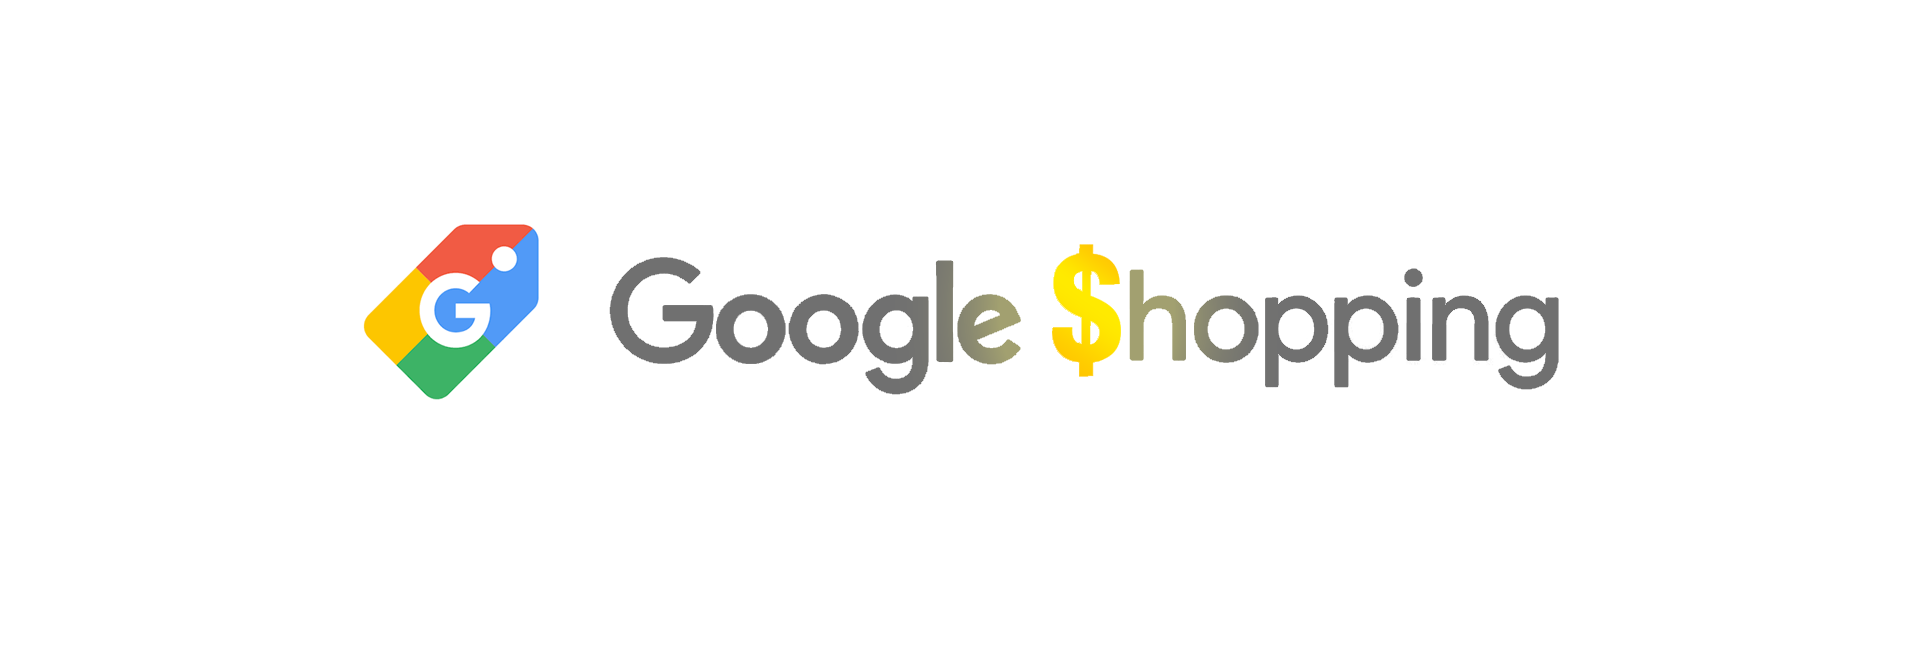 Product Listing Ads: Benefits of using Google Shopping